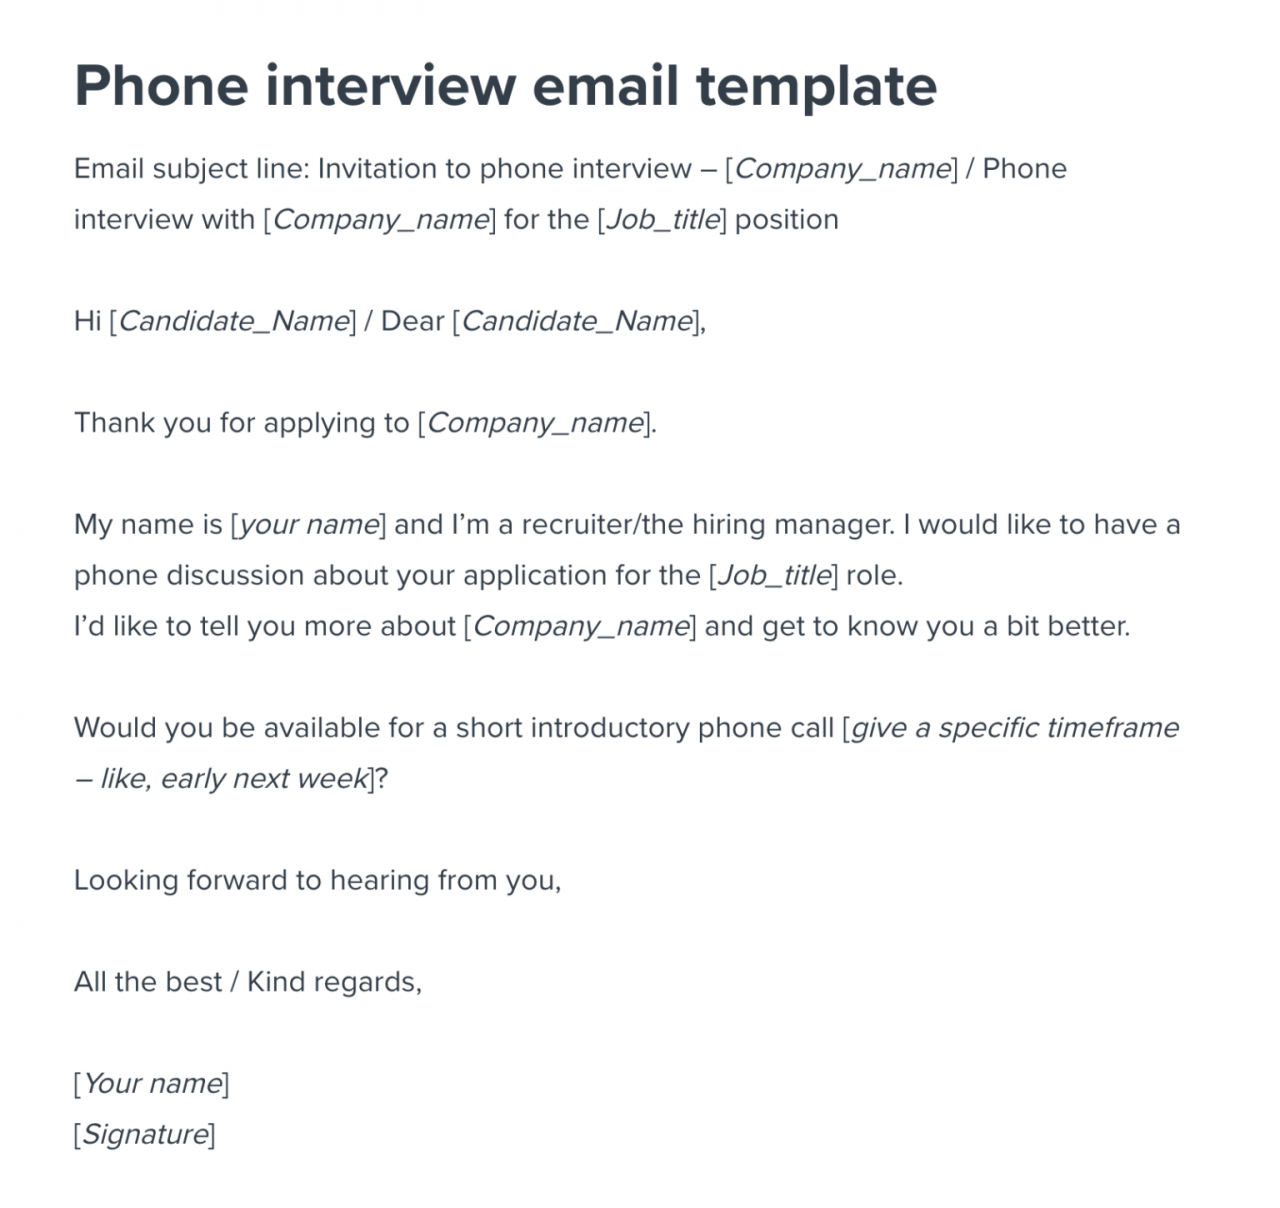 Call for an interview email